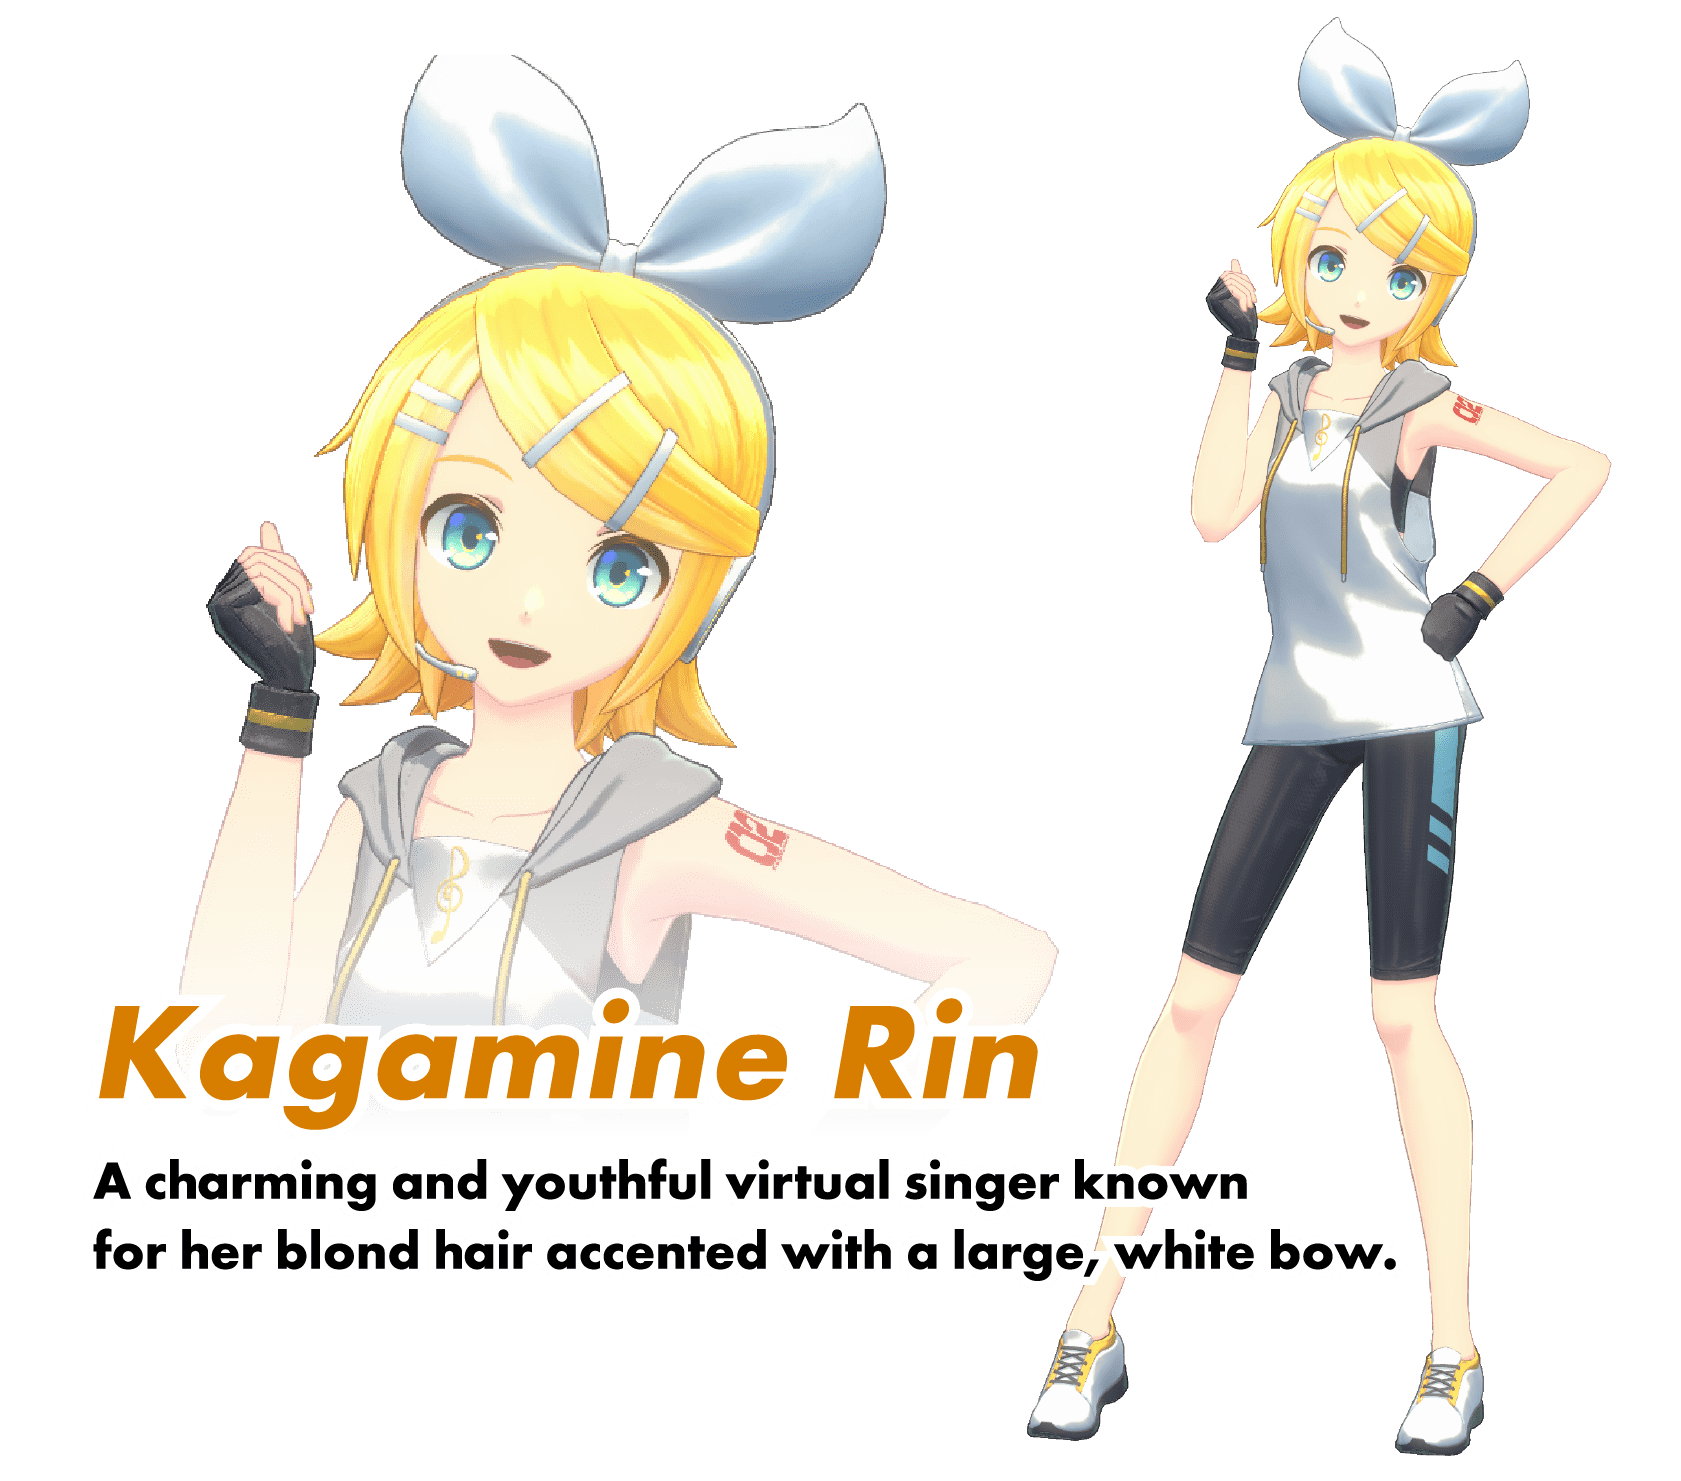 Kagamine Rin:A charming and youthful virtual singer known for her blond hair accented with a large, white bow.